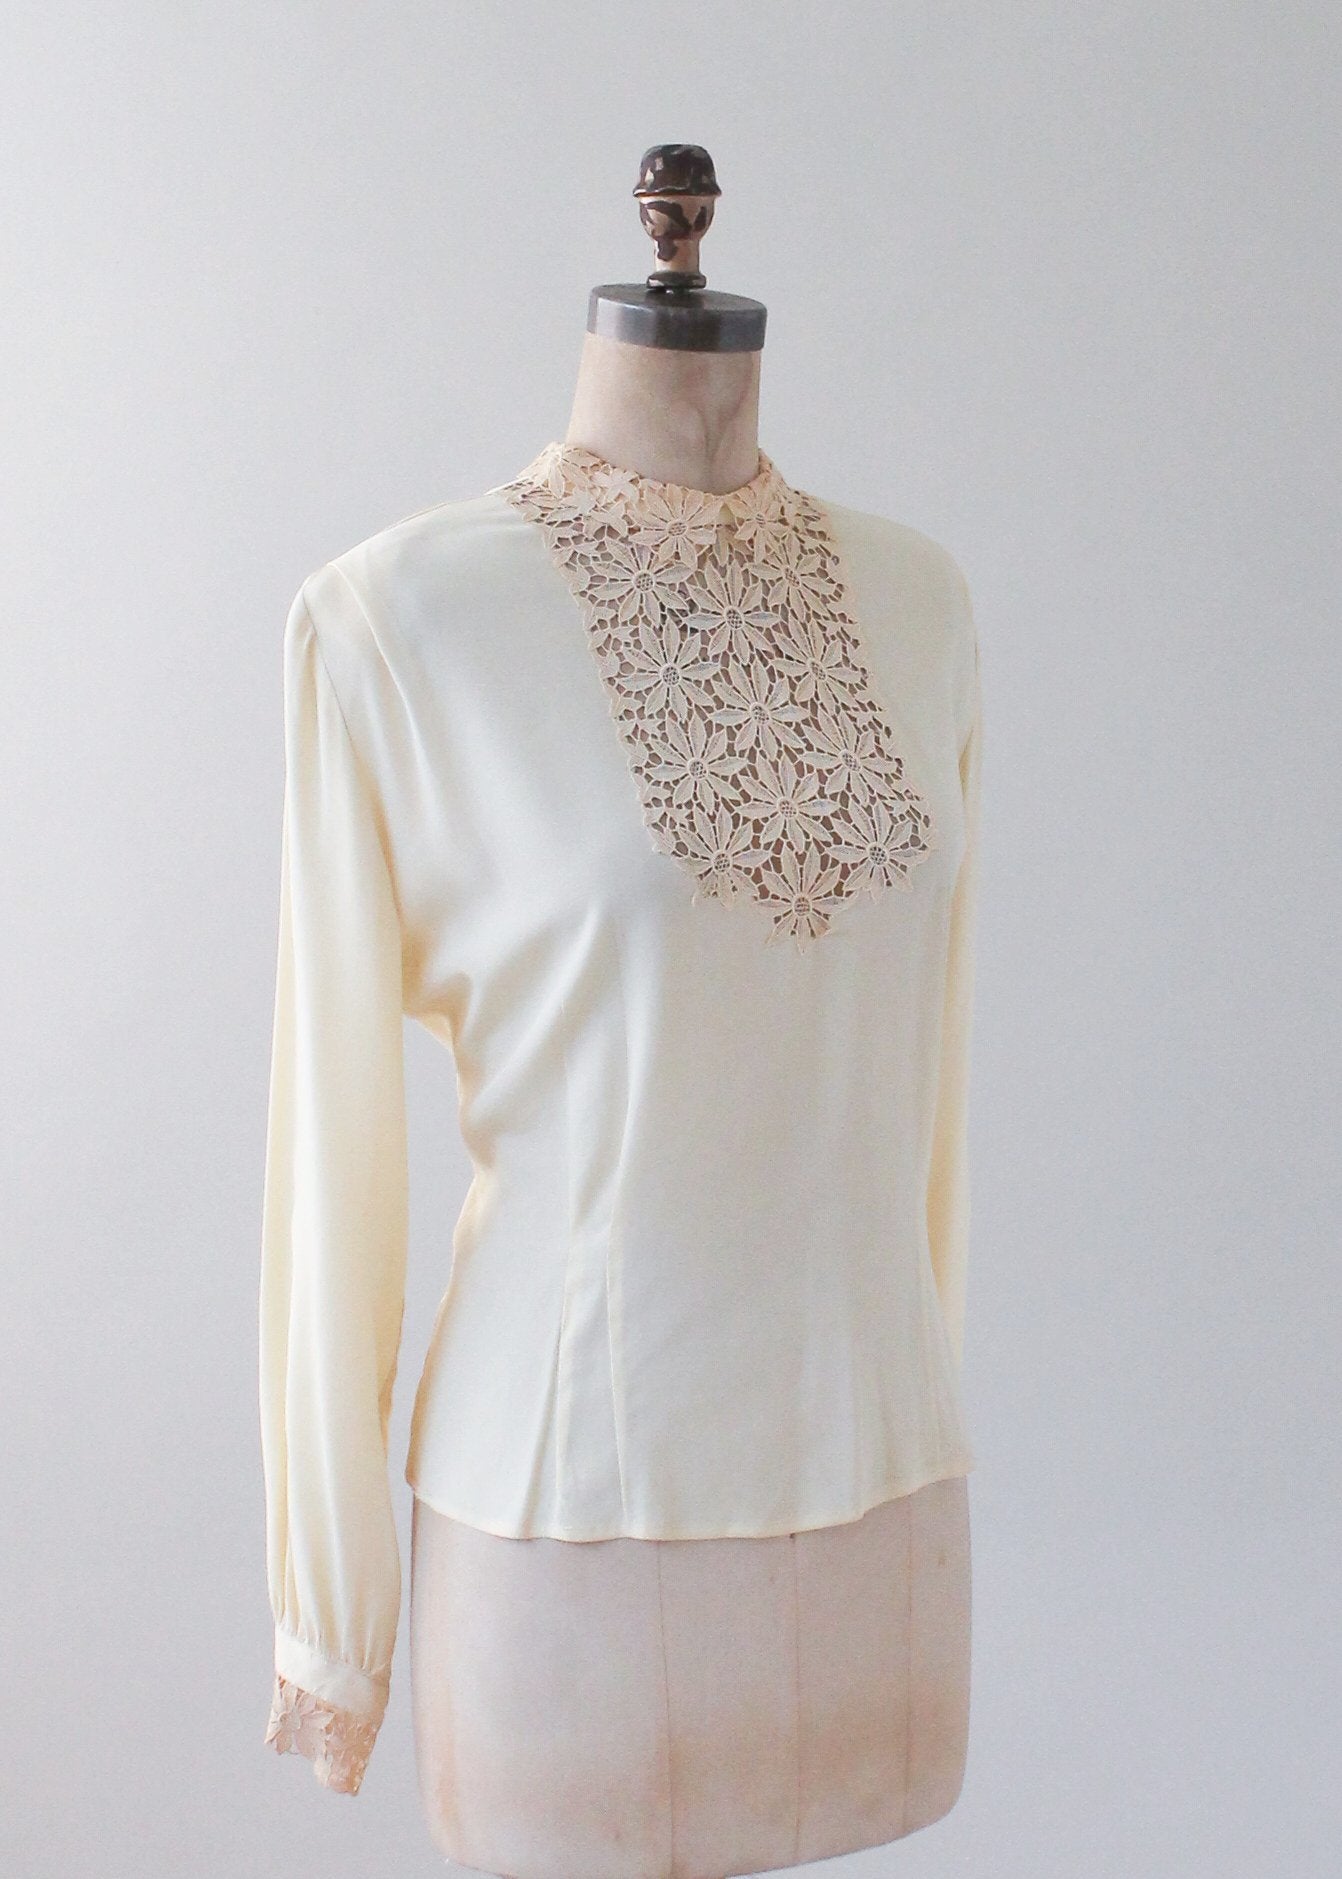 Vintage 1940s Ivory Silk and Lace Blouse - Raleigh Vintage